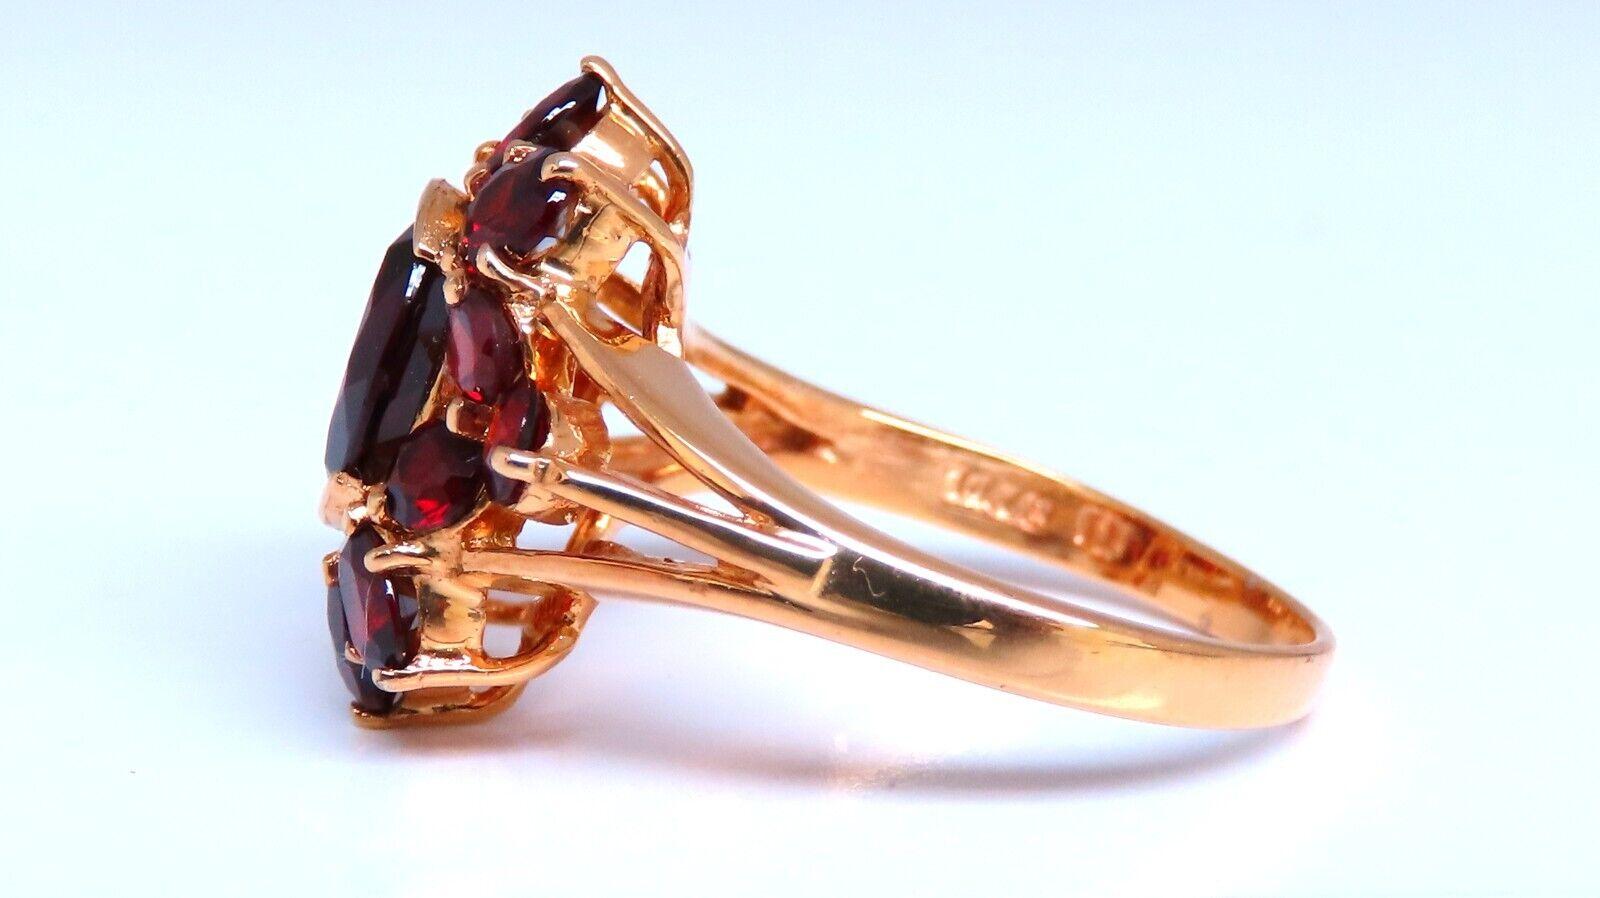 3ct Natural Garnet Ring

16 x 16mm deck 

Clean Clarity & Transparent

Vivid Deep pomegranate Red

  14kt. yellow gold

4.6 grams

Ring Current size: 6.25

Depth of ring: 6.7mm

(Free Resize Service, Please inquire)